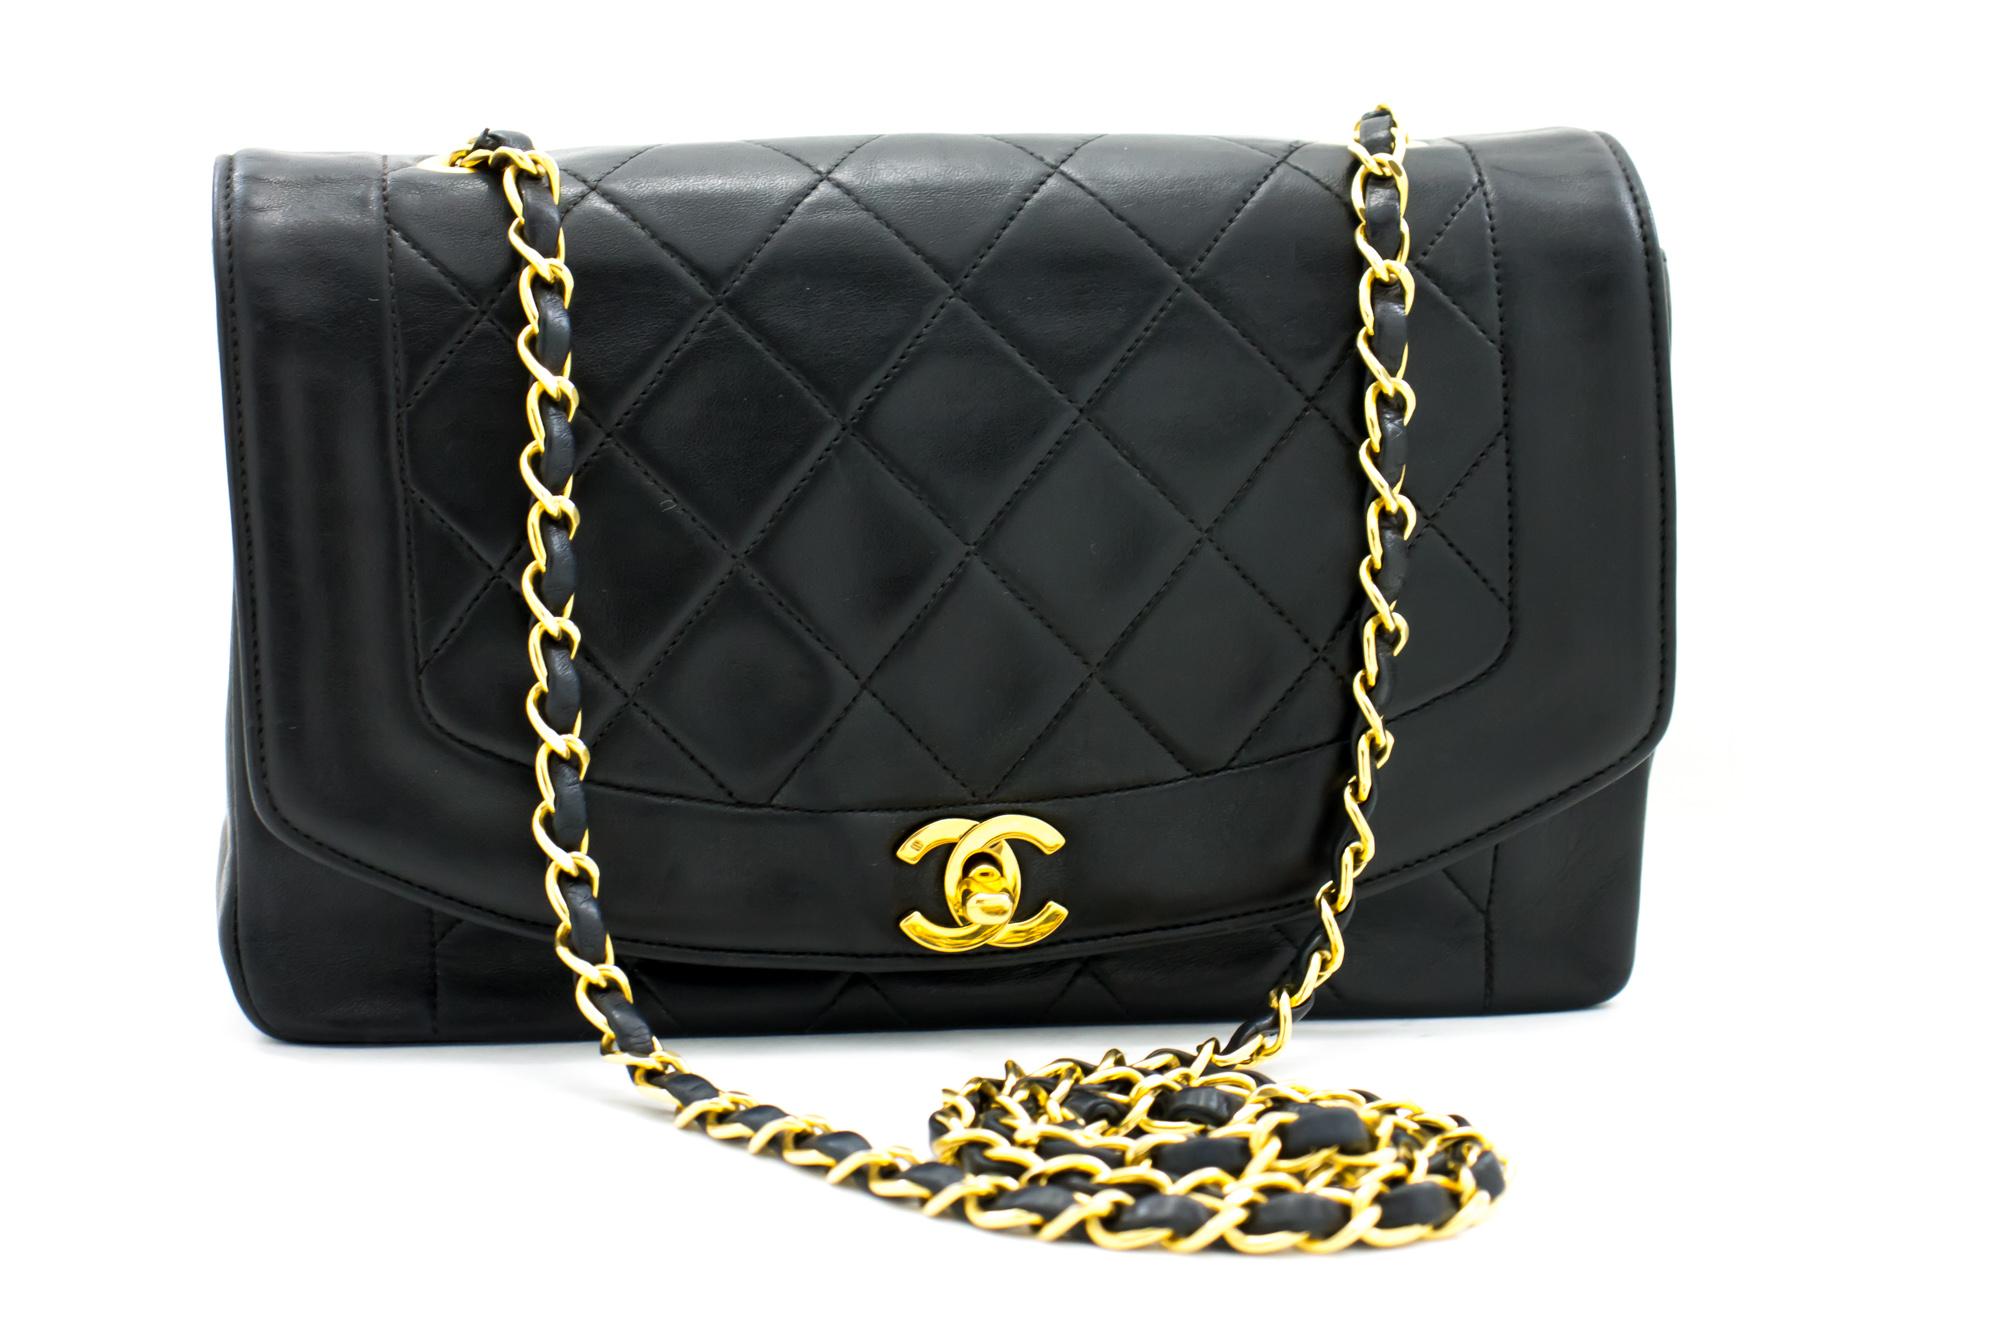 An authentic CHANEL Diana Flap Chain Shoulder Bag Black Quilted made of black Lambskin Purse. The color is Black. The outside material is Leather. The pattern is Solid. This item is Contemporary. The year of manufacture would be 1986.
Conditions &